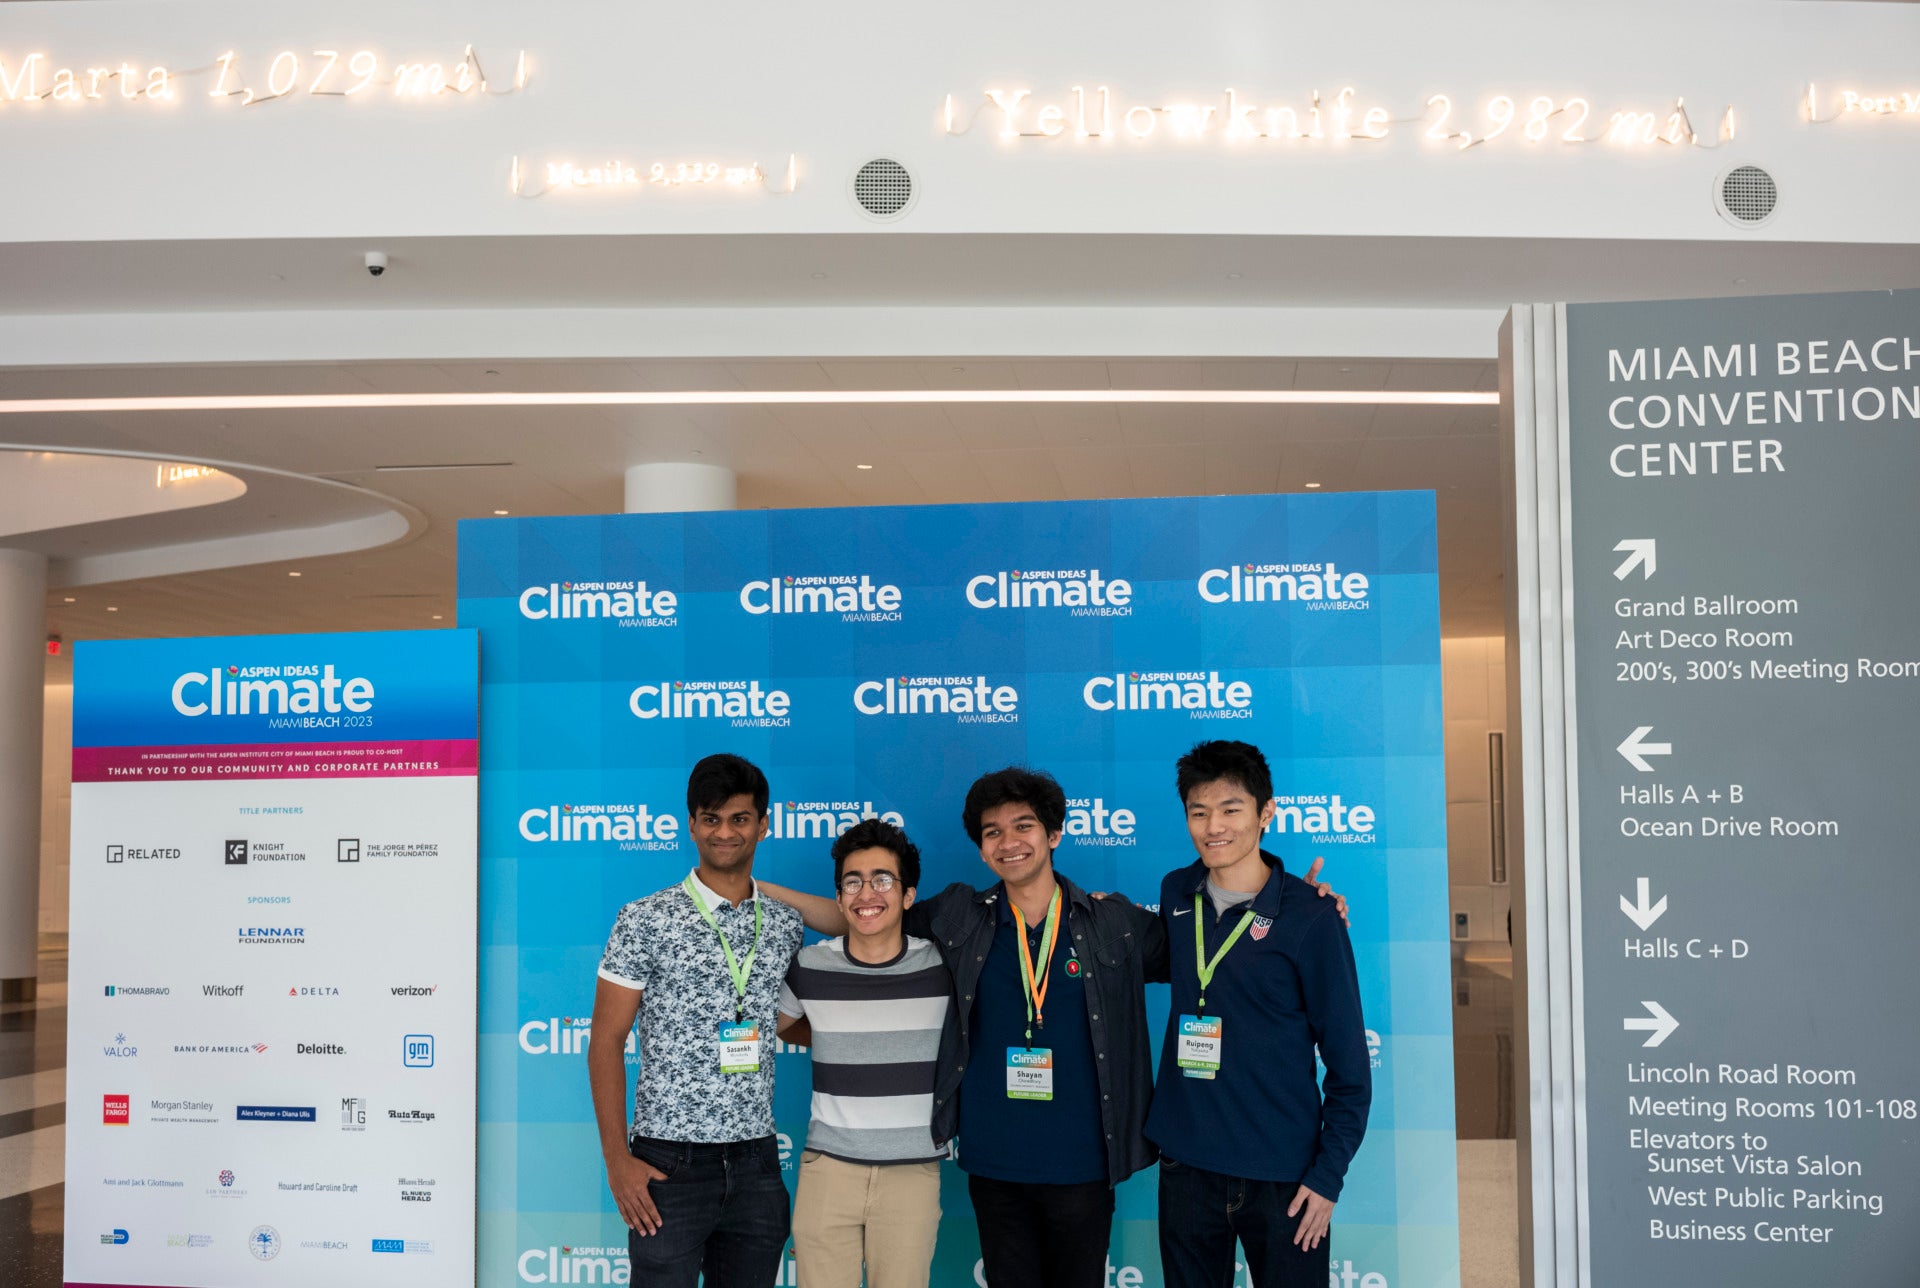 Four young adults stand in front of a step and repeat with a blue background and the Aspen Ideas Climate logo. To their left is a directional sign for navigating the Miami Beach Convention Center.